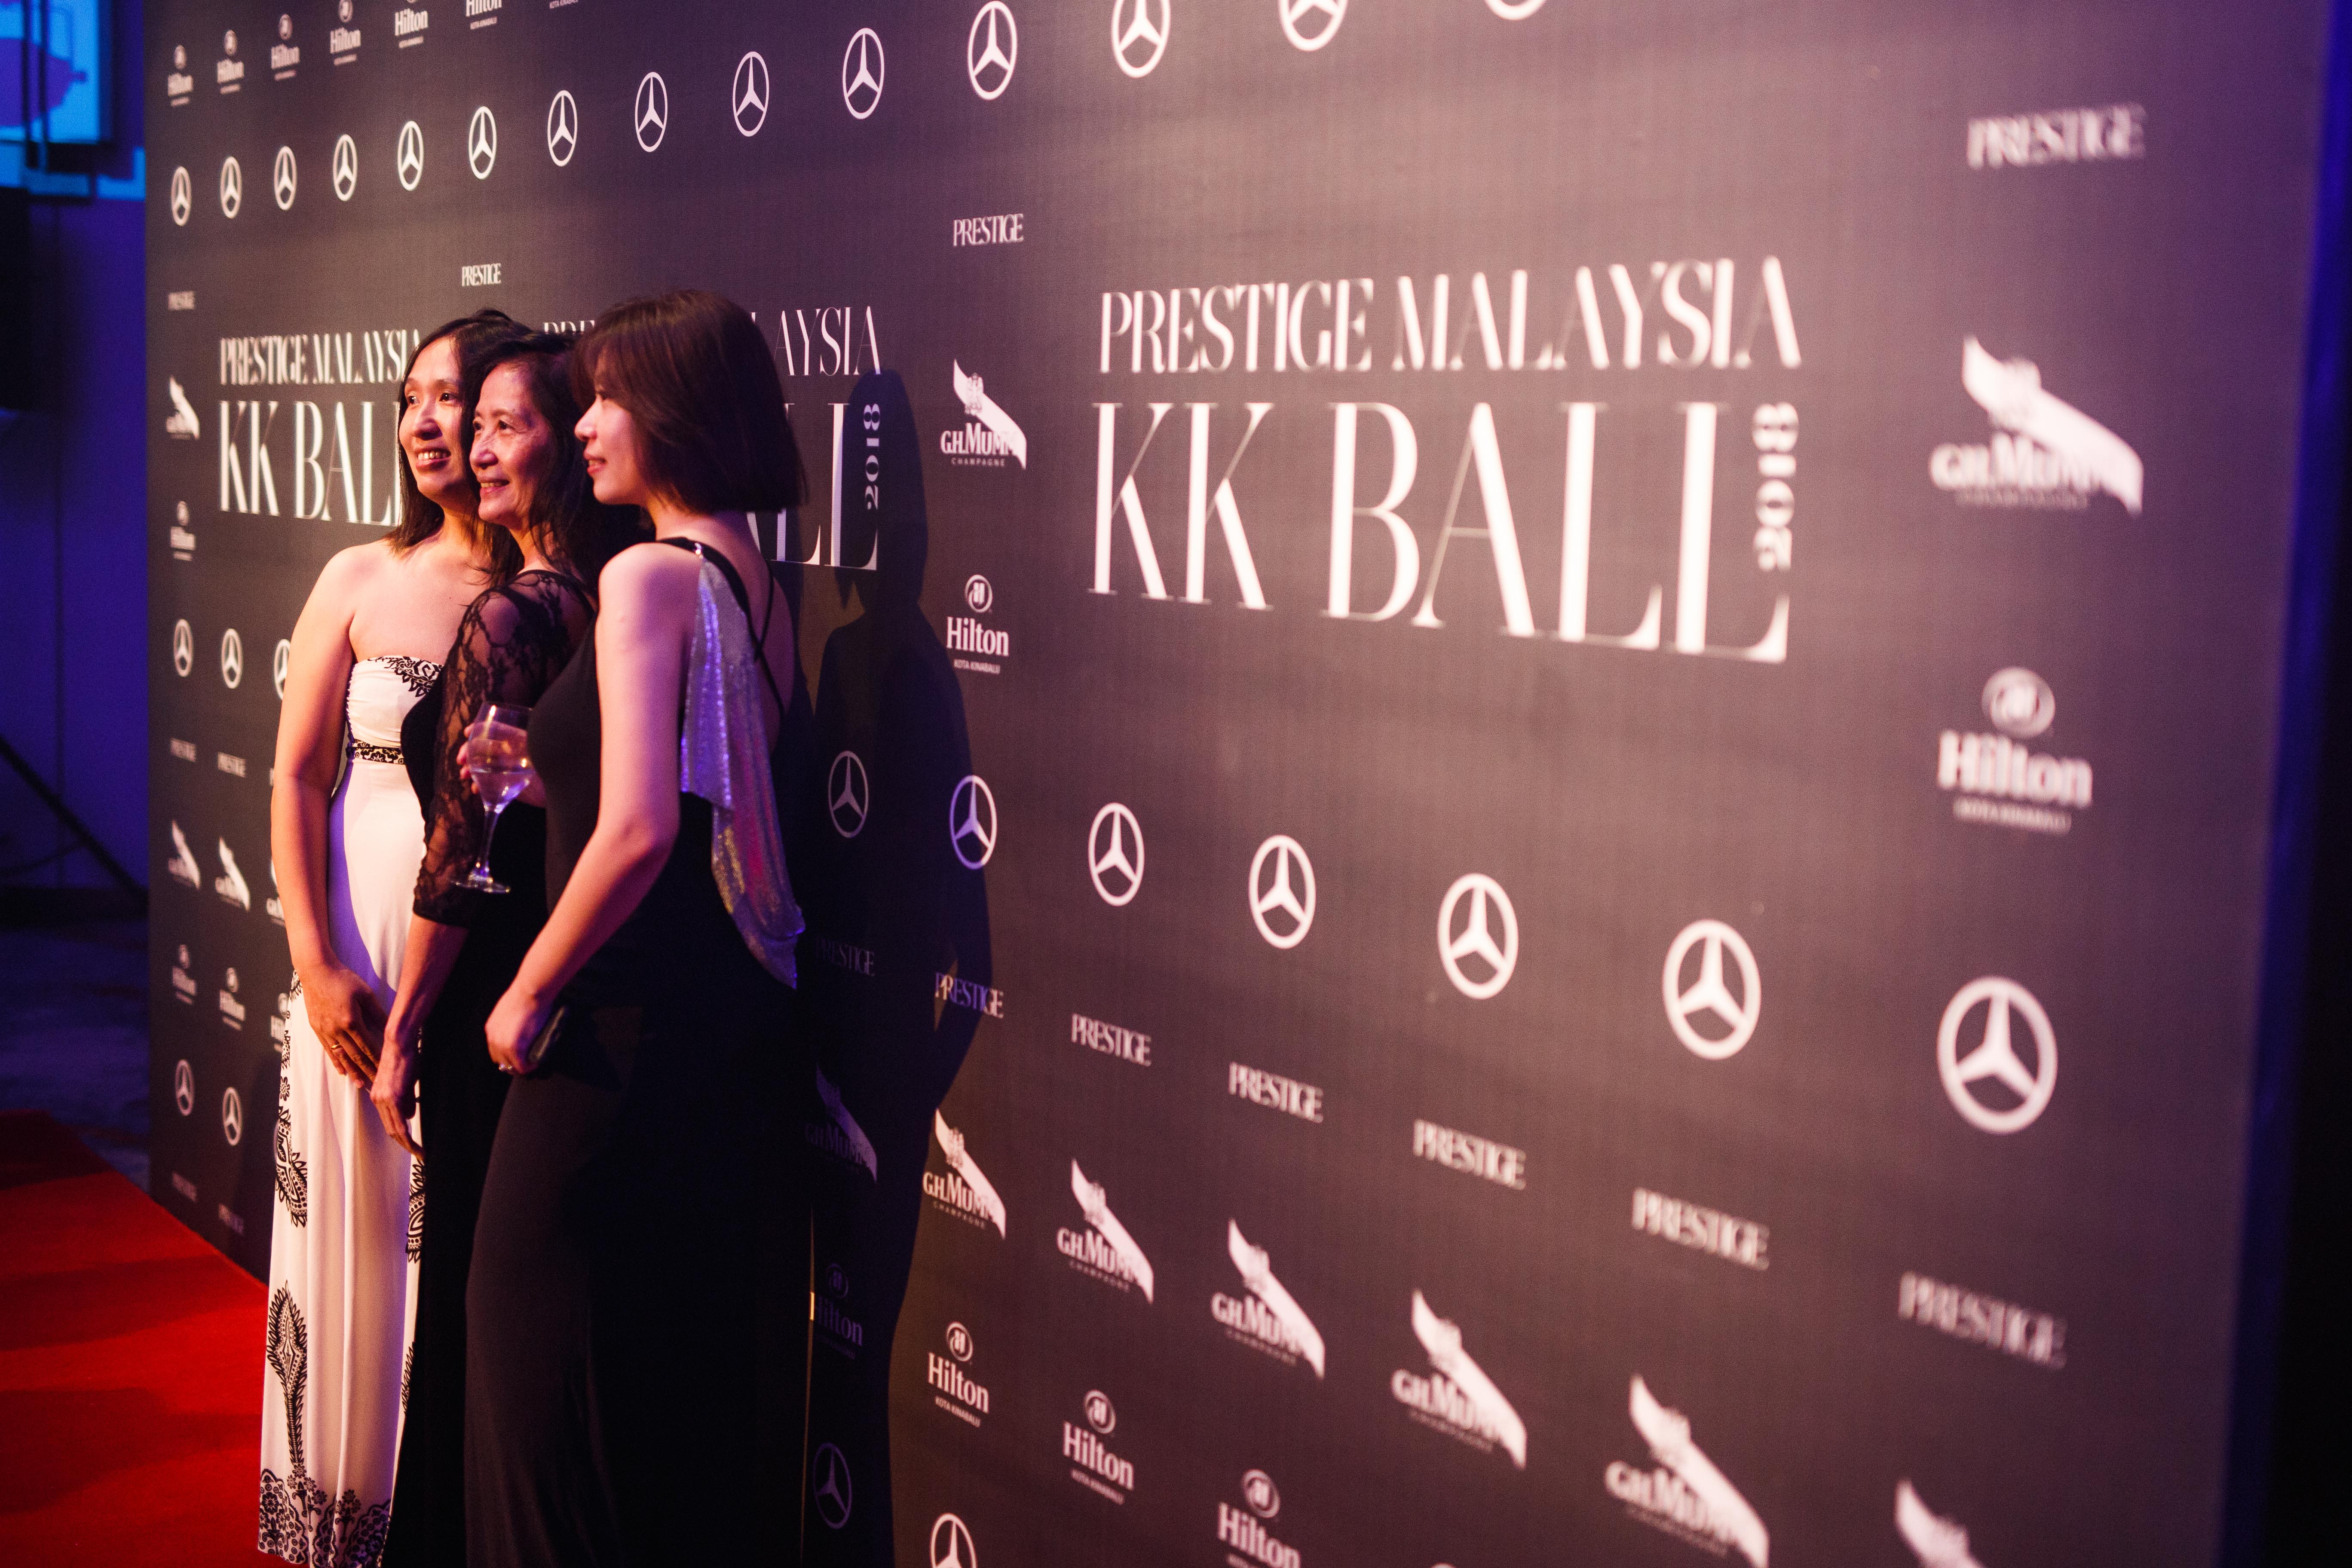 The Most Memorable Moments Of The Prestige Malaysia KK Ball 2018